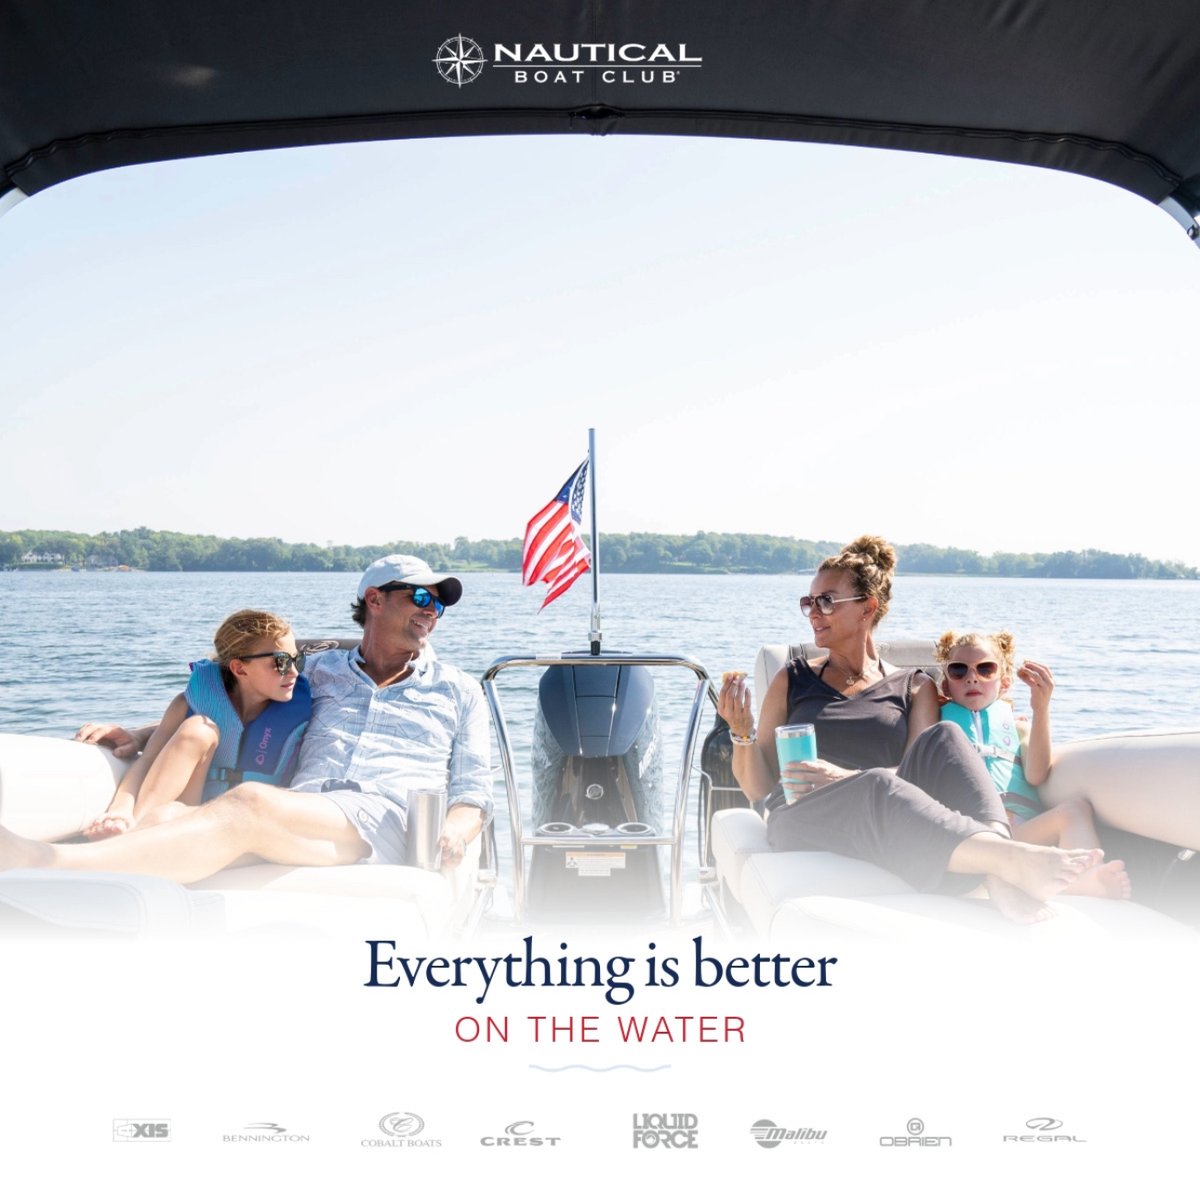 Everything is better on the water! Enjoy making memories with friends and family. 

#lowcountry #lowcountryfishing #jointheclub #nauticalboatclubmp #nauticalboatclub #liveyourbestlifenow #youonlyliveonce #charlestonsc #boatingcountryclub